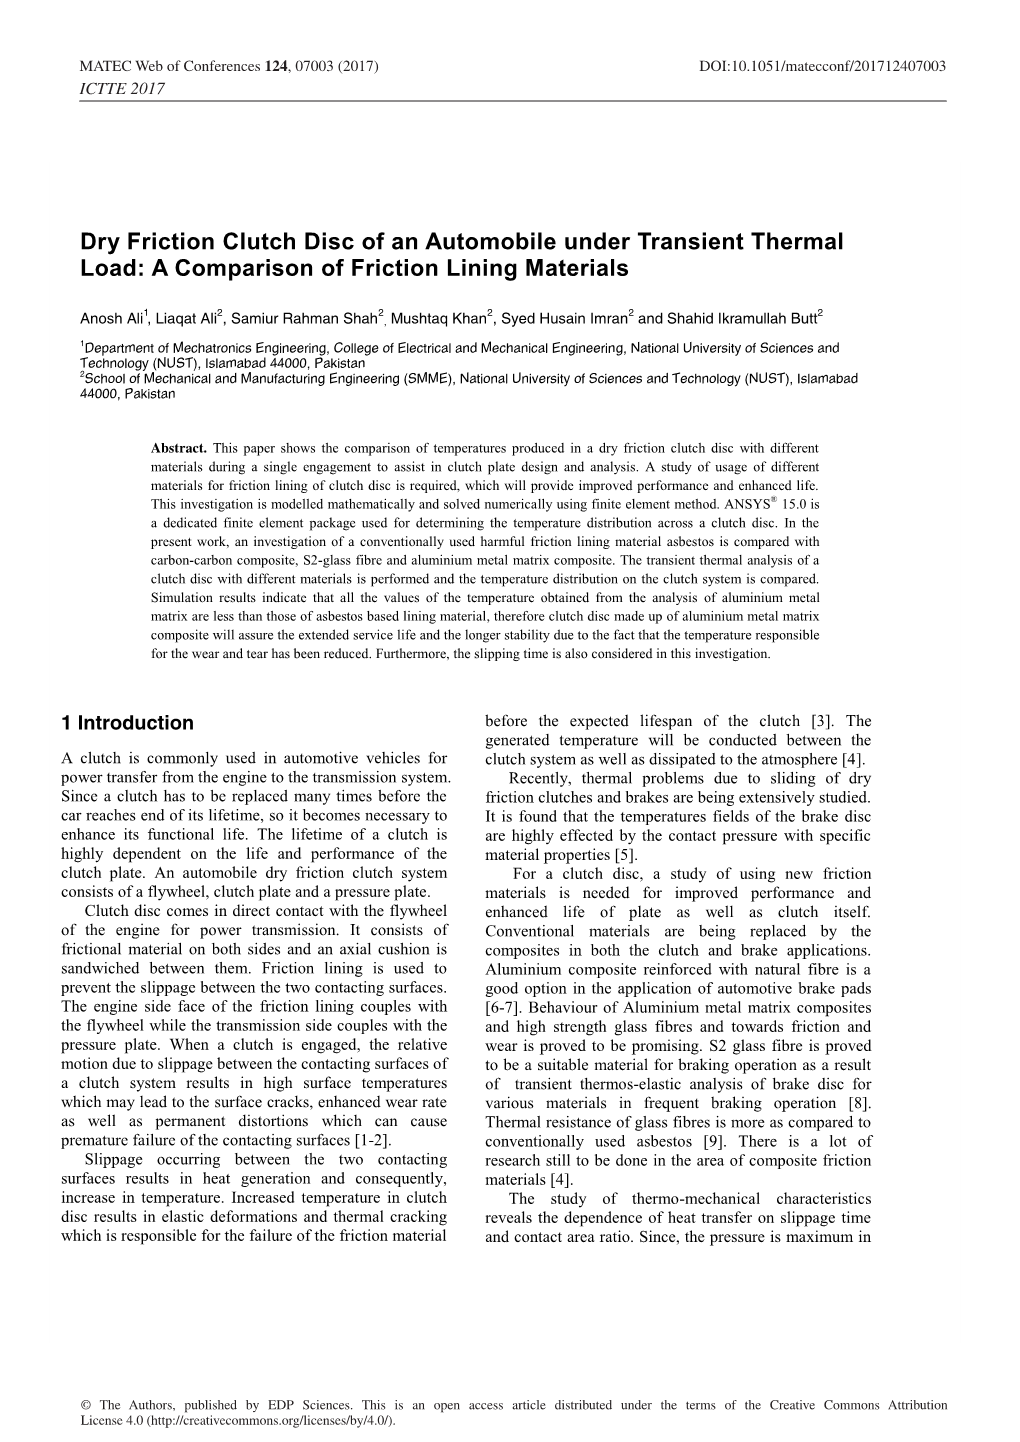 Dry Friction Clutch Disc of an Automobile Under Transient Thermal Load: a Comparison of Friction Lining Materials